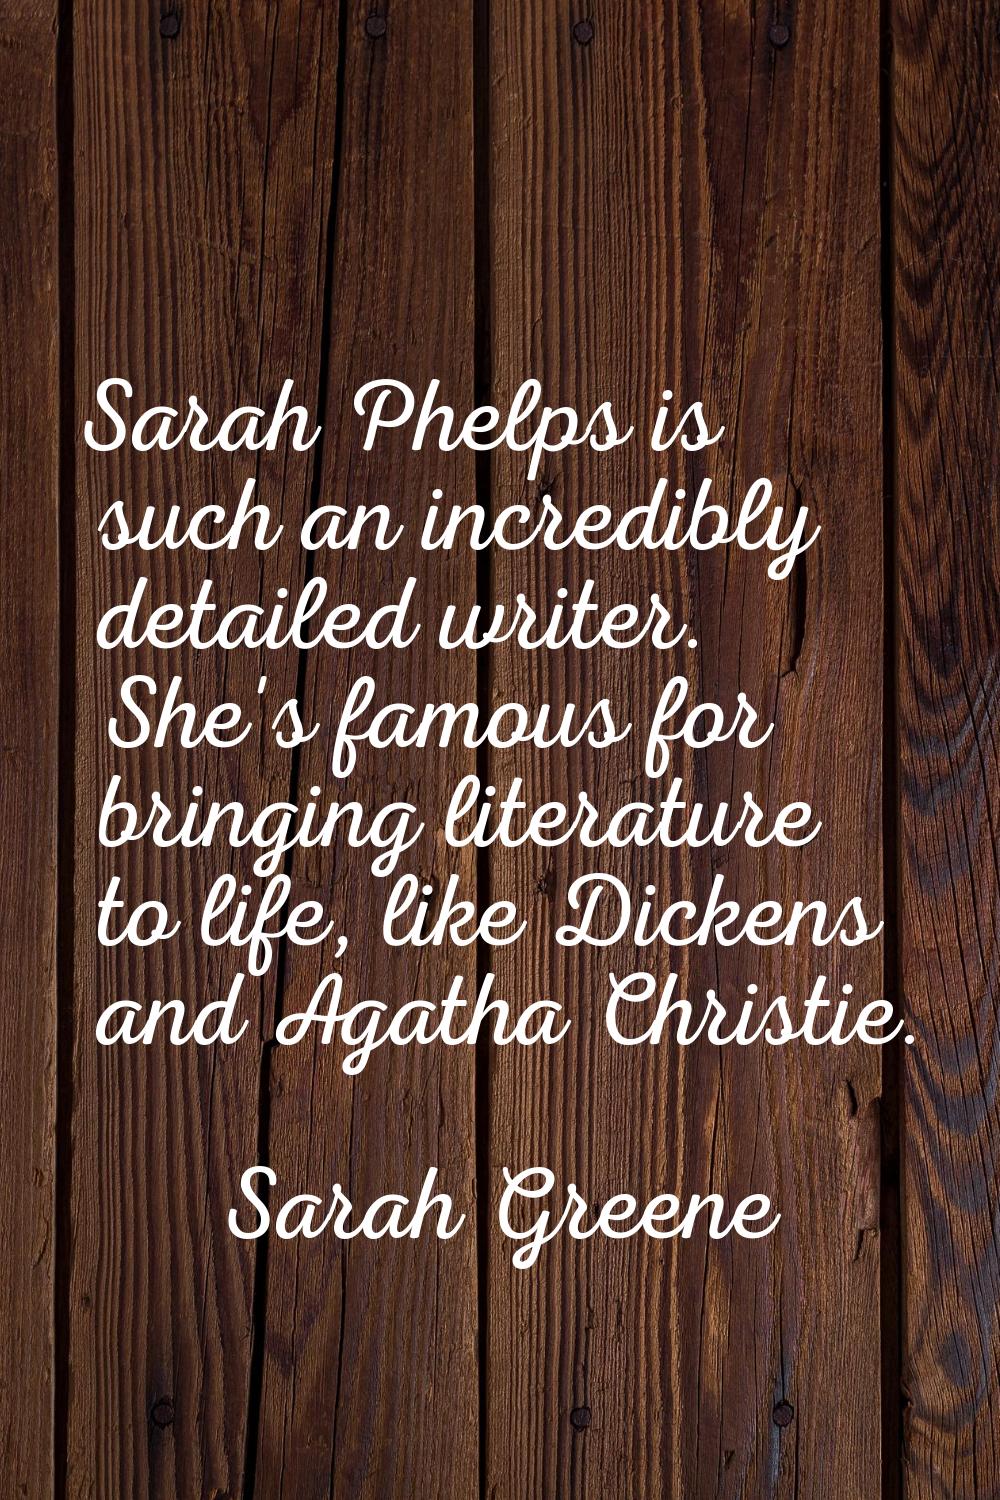 Sarah Phelps is such an incredibly detailed writer. She's famous for bringing literature to life, l